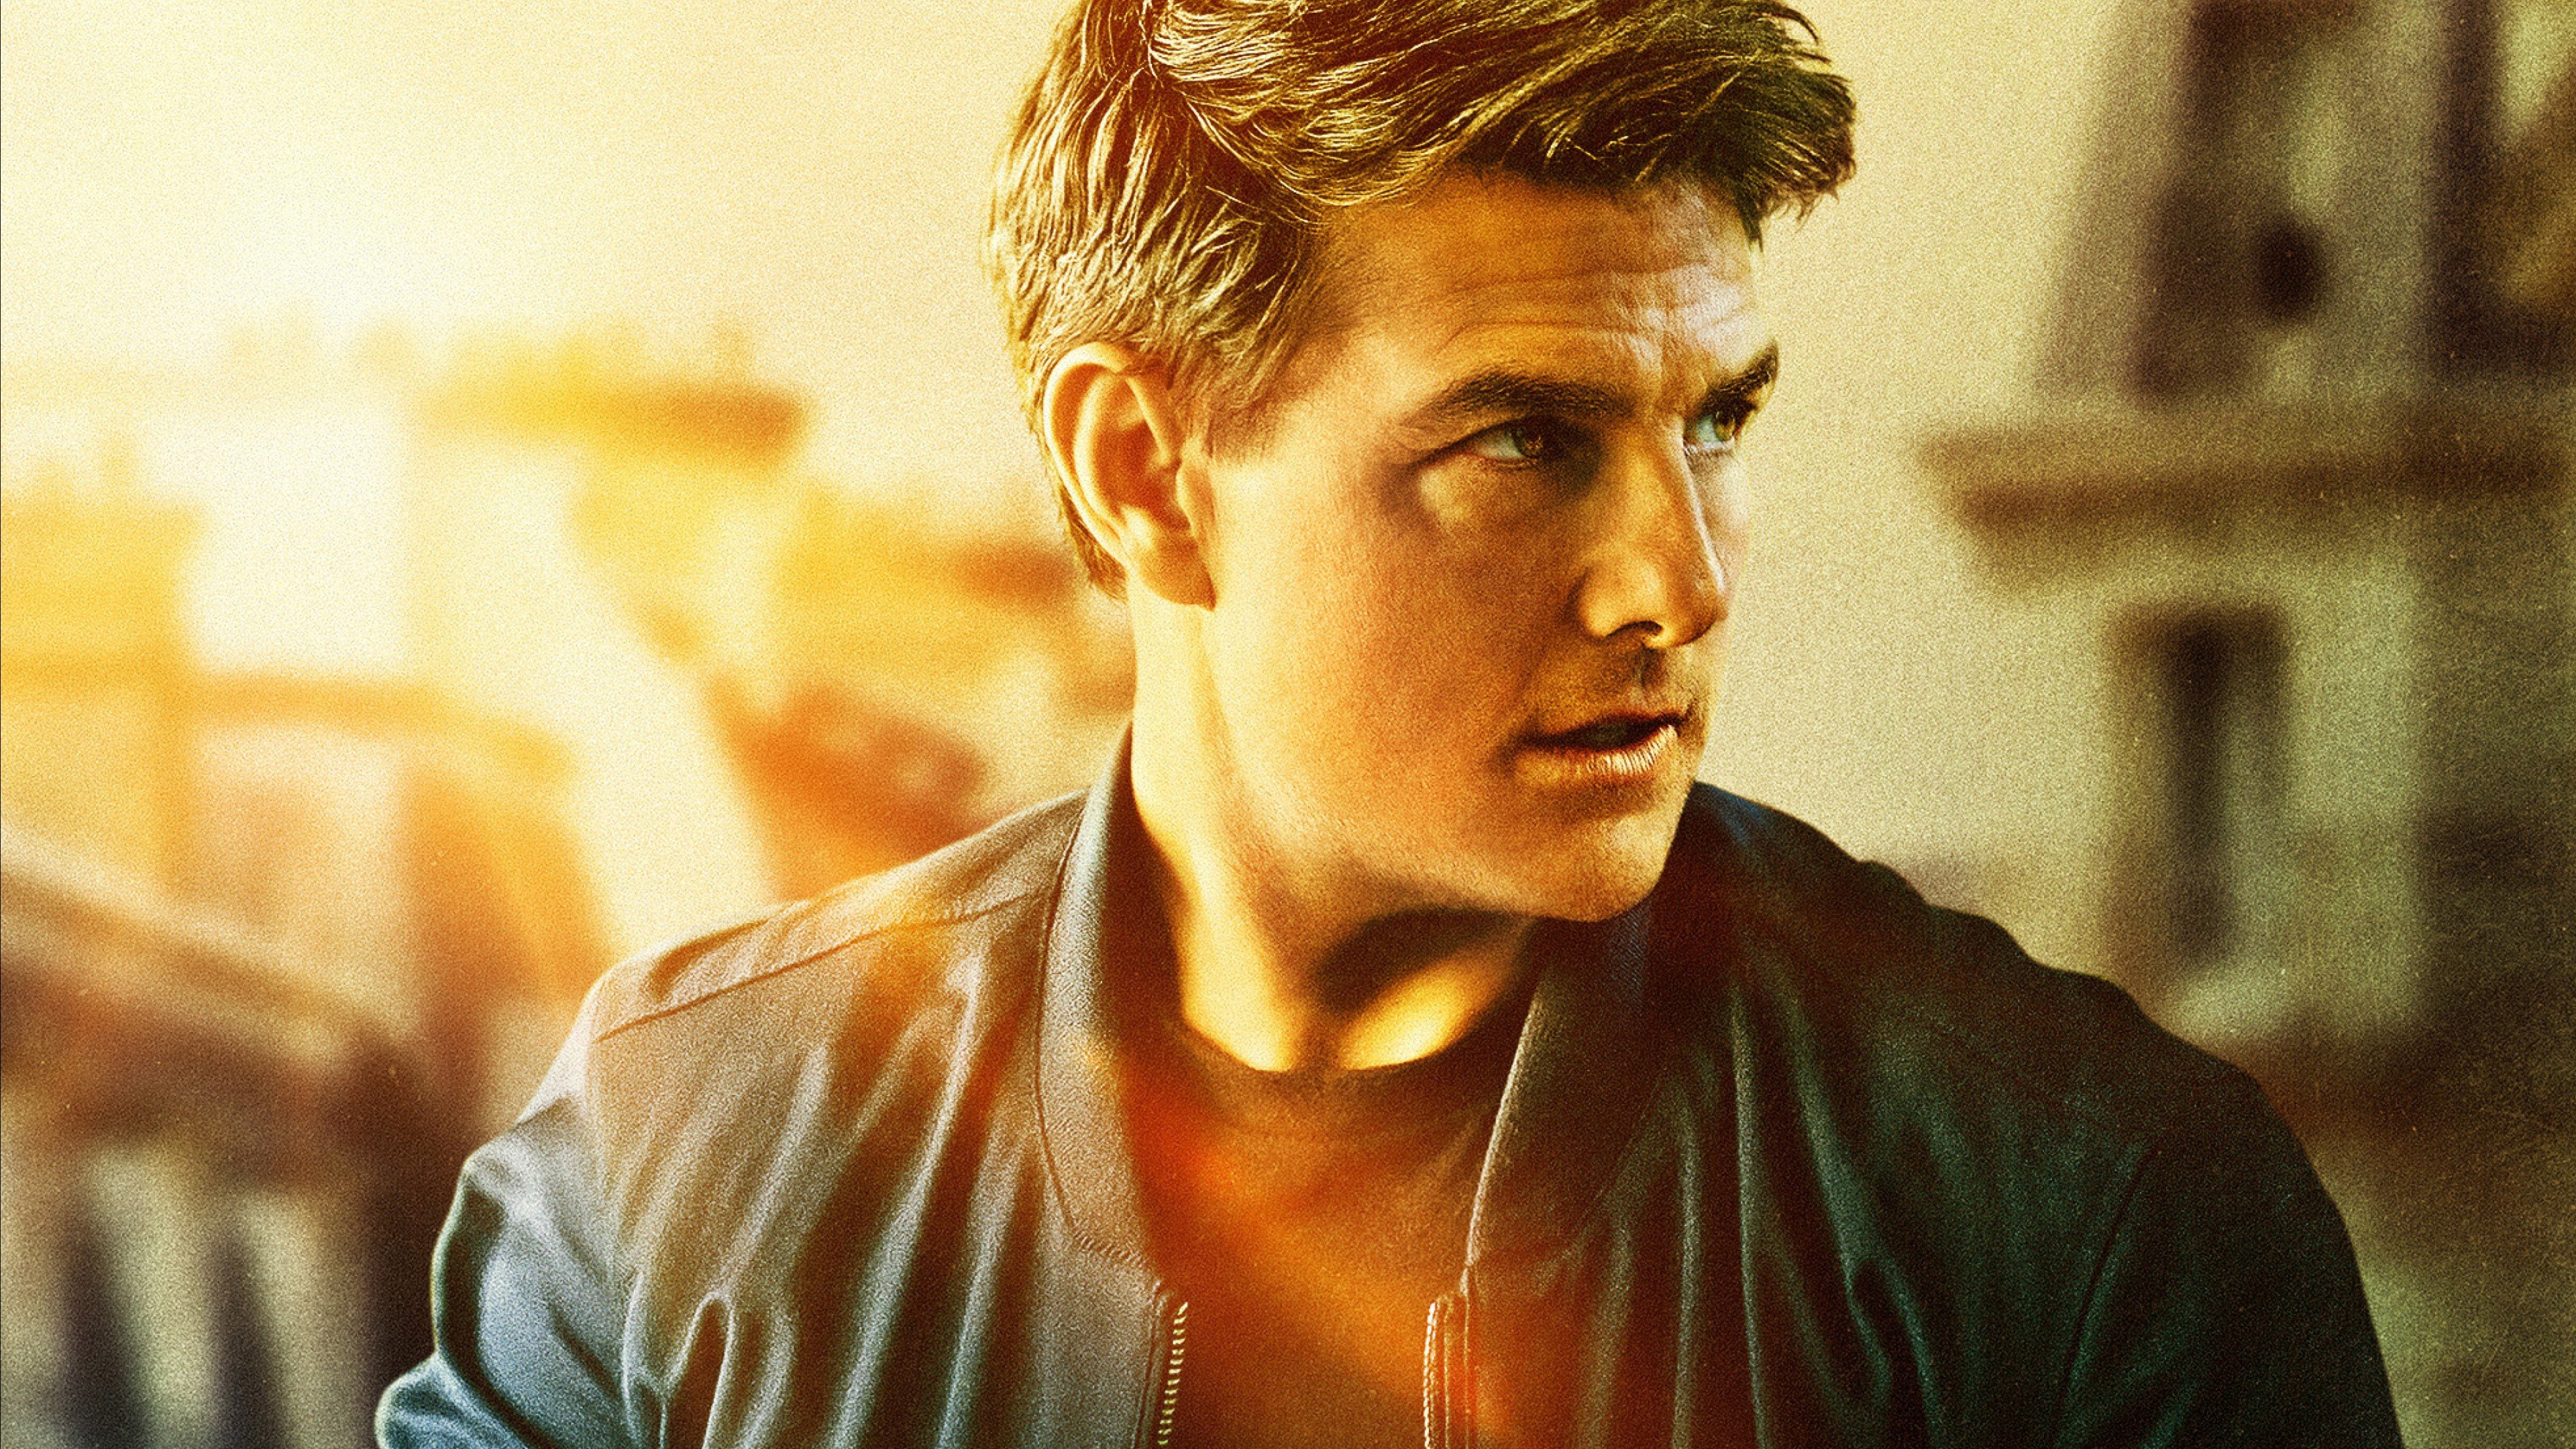 Wallpaper Mission: Impossible, Tom Cruise, 4K, Movies